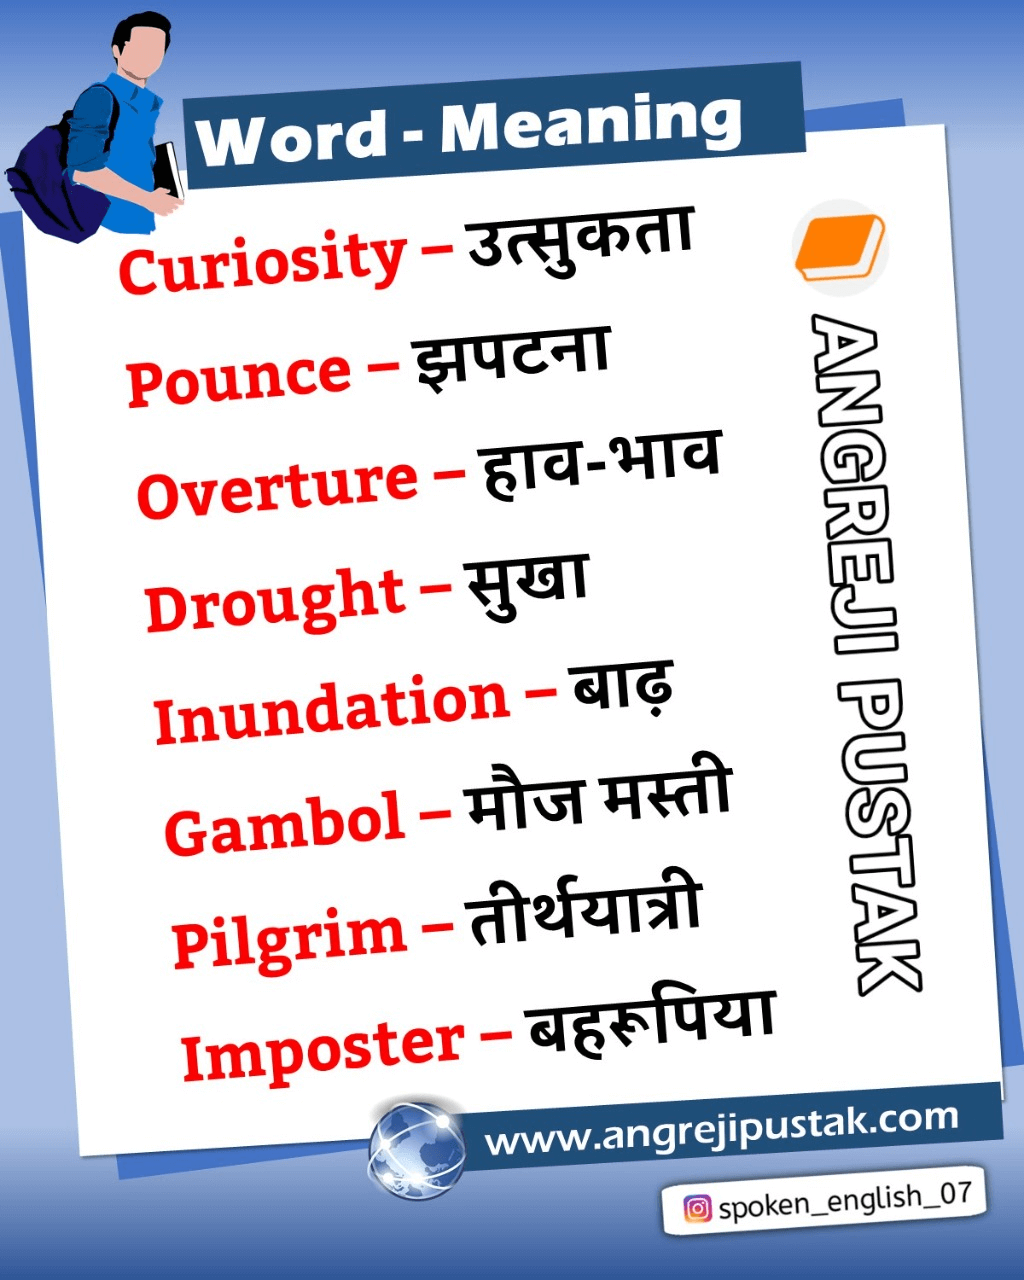 2-letter-word-list-hindi-without-matra-teach-on